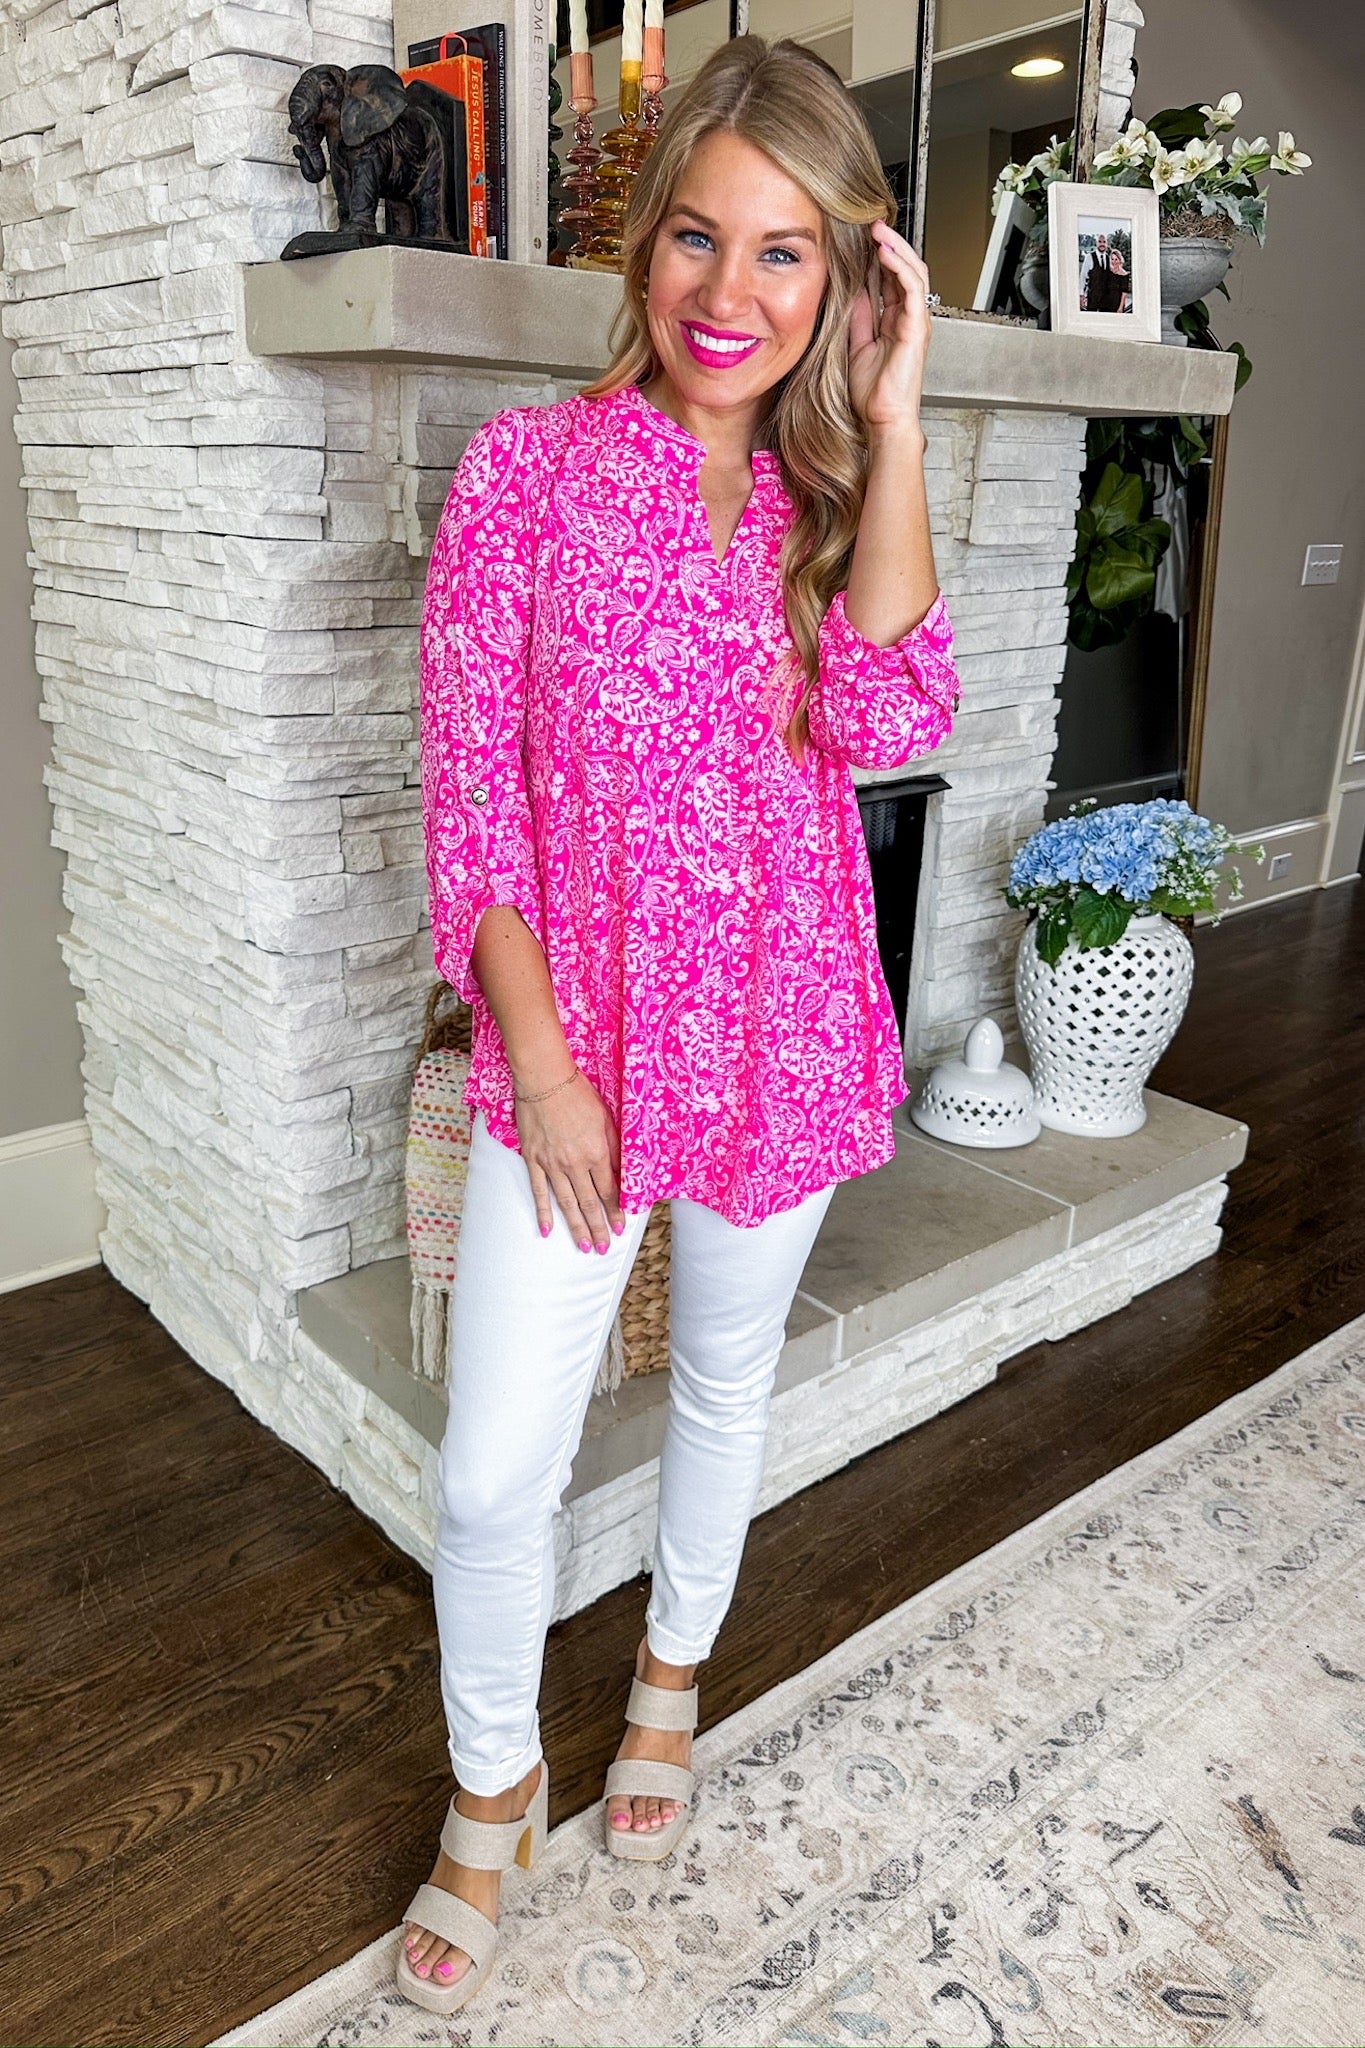 The Lizzy Top in Hot Pink & White Paisley